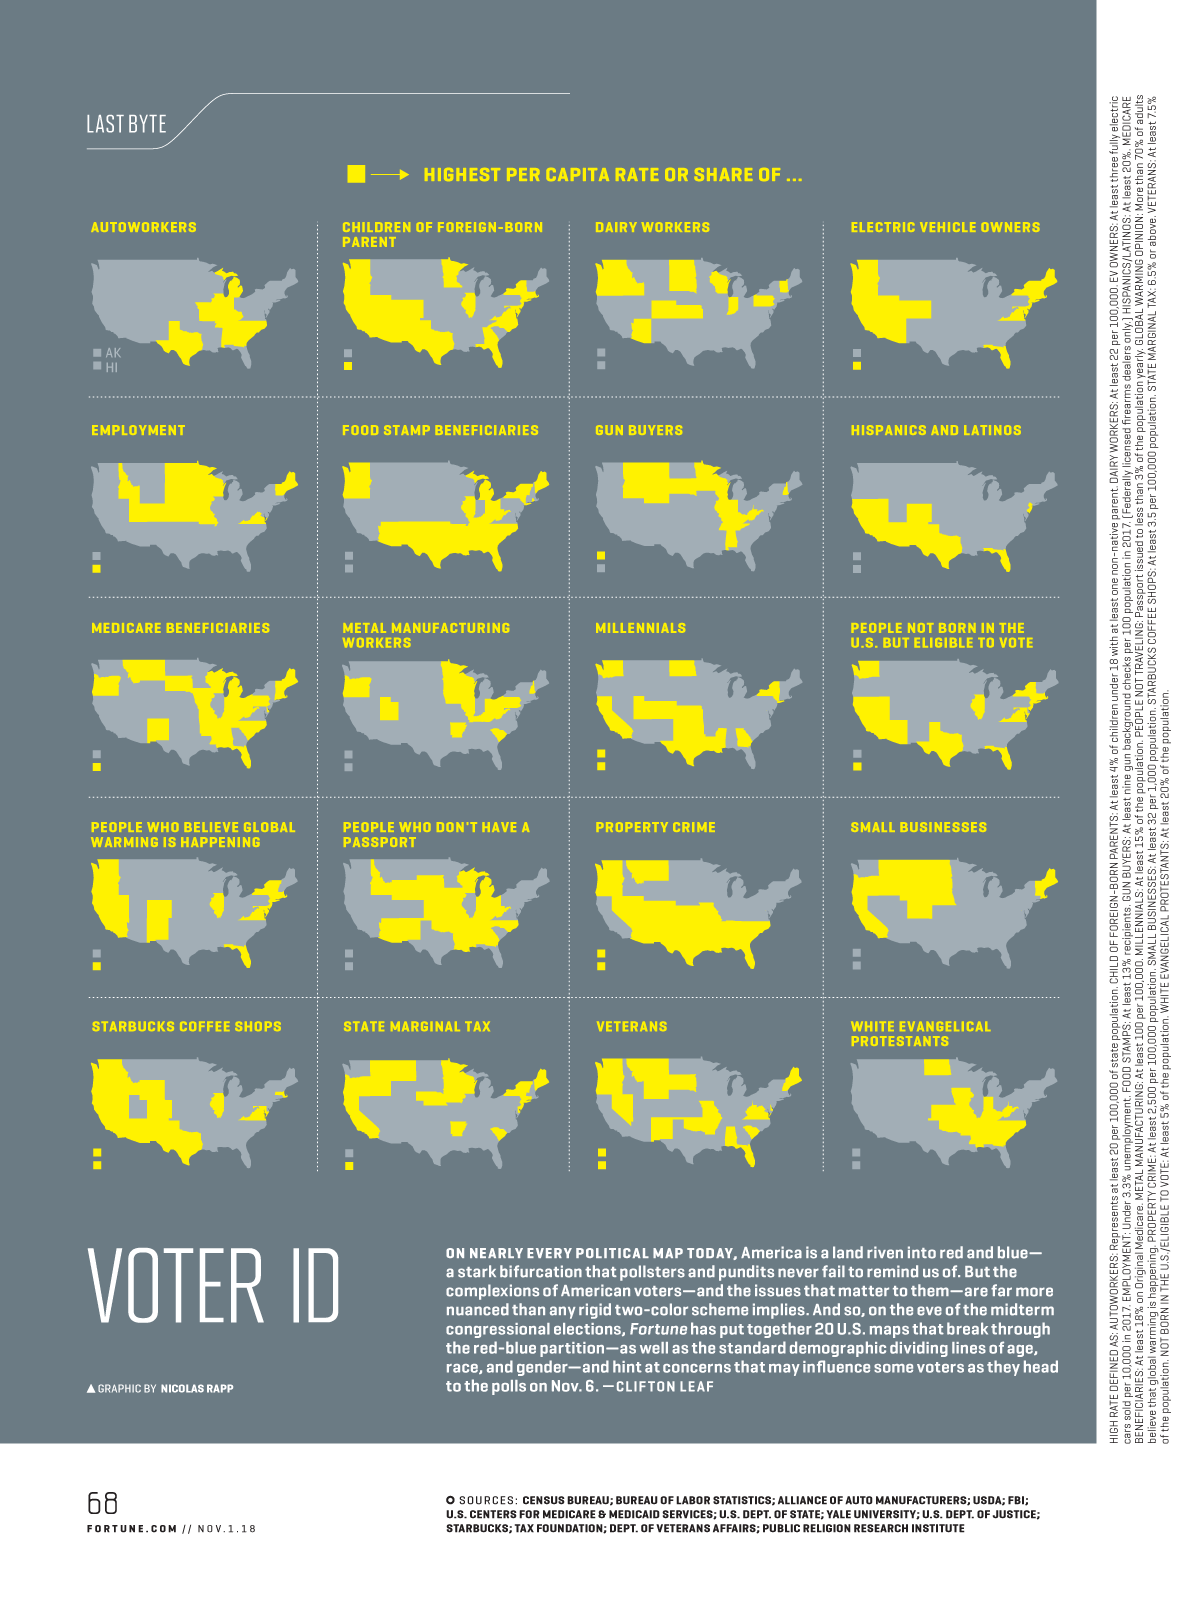 Maps shows how the U.S. is fragmented ahead of midterm elections